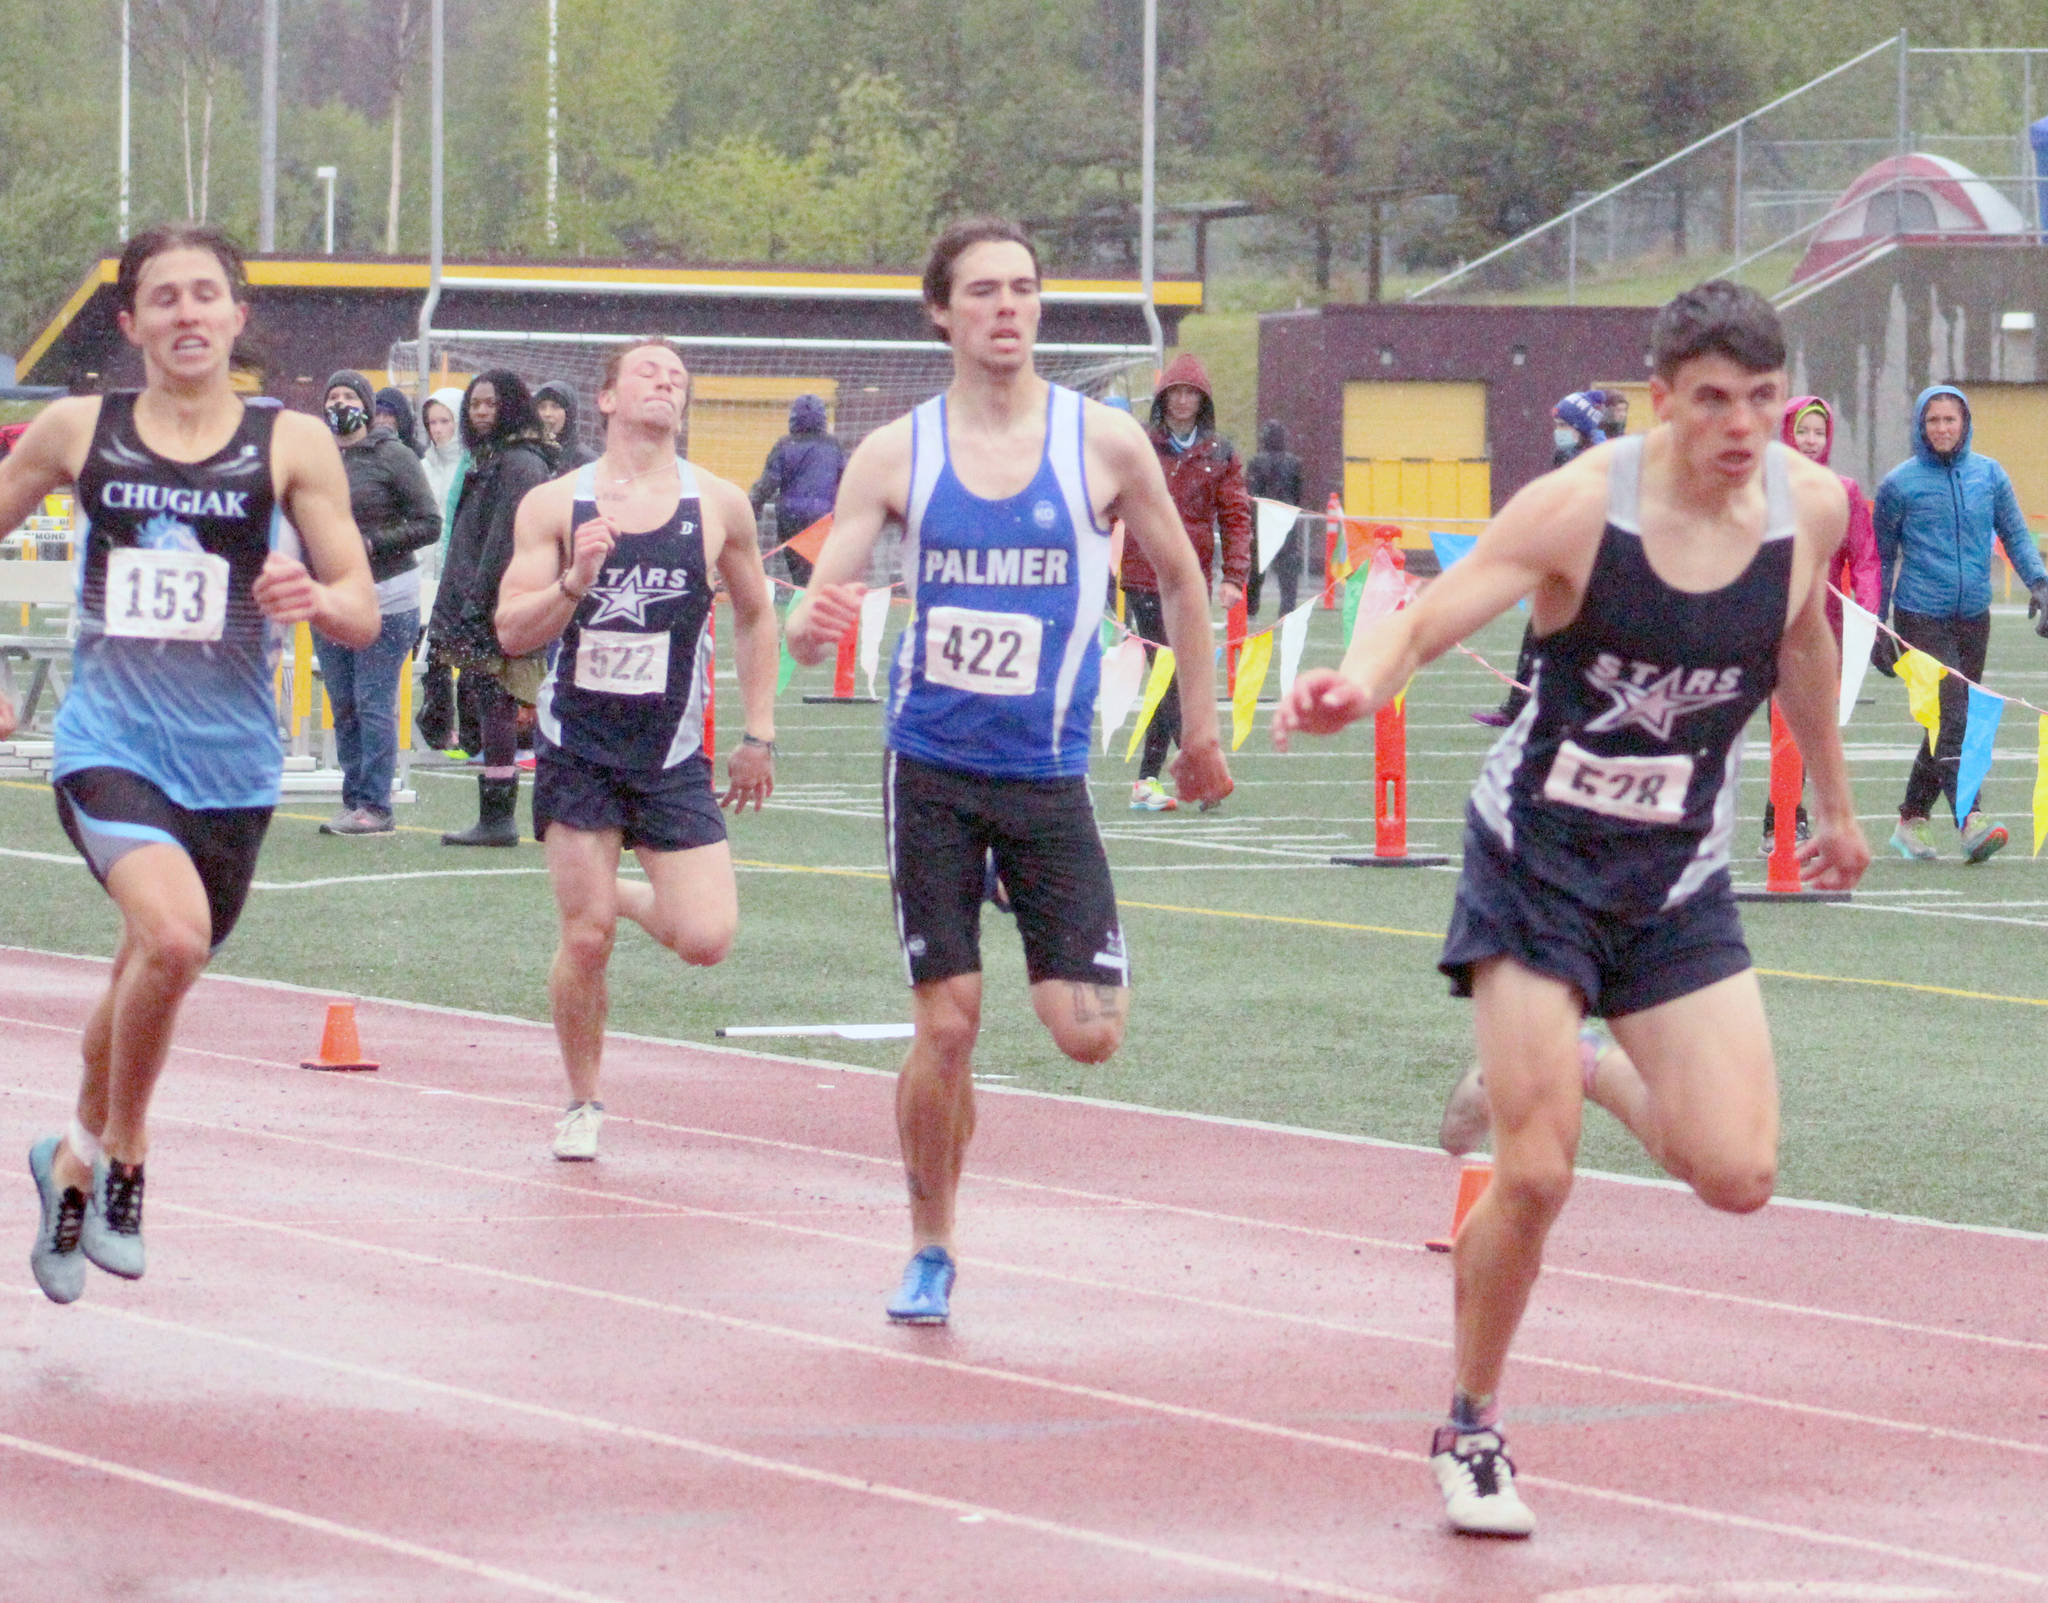 Soldotna’s Nathanael Johnson leans to win the 400 meters at the Division I state track and field meet at Dimond High School in Anchorage, Alaska, on Saturday, May 29, 2021. (Photo by Tim Rockey/Frontiersman)